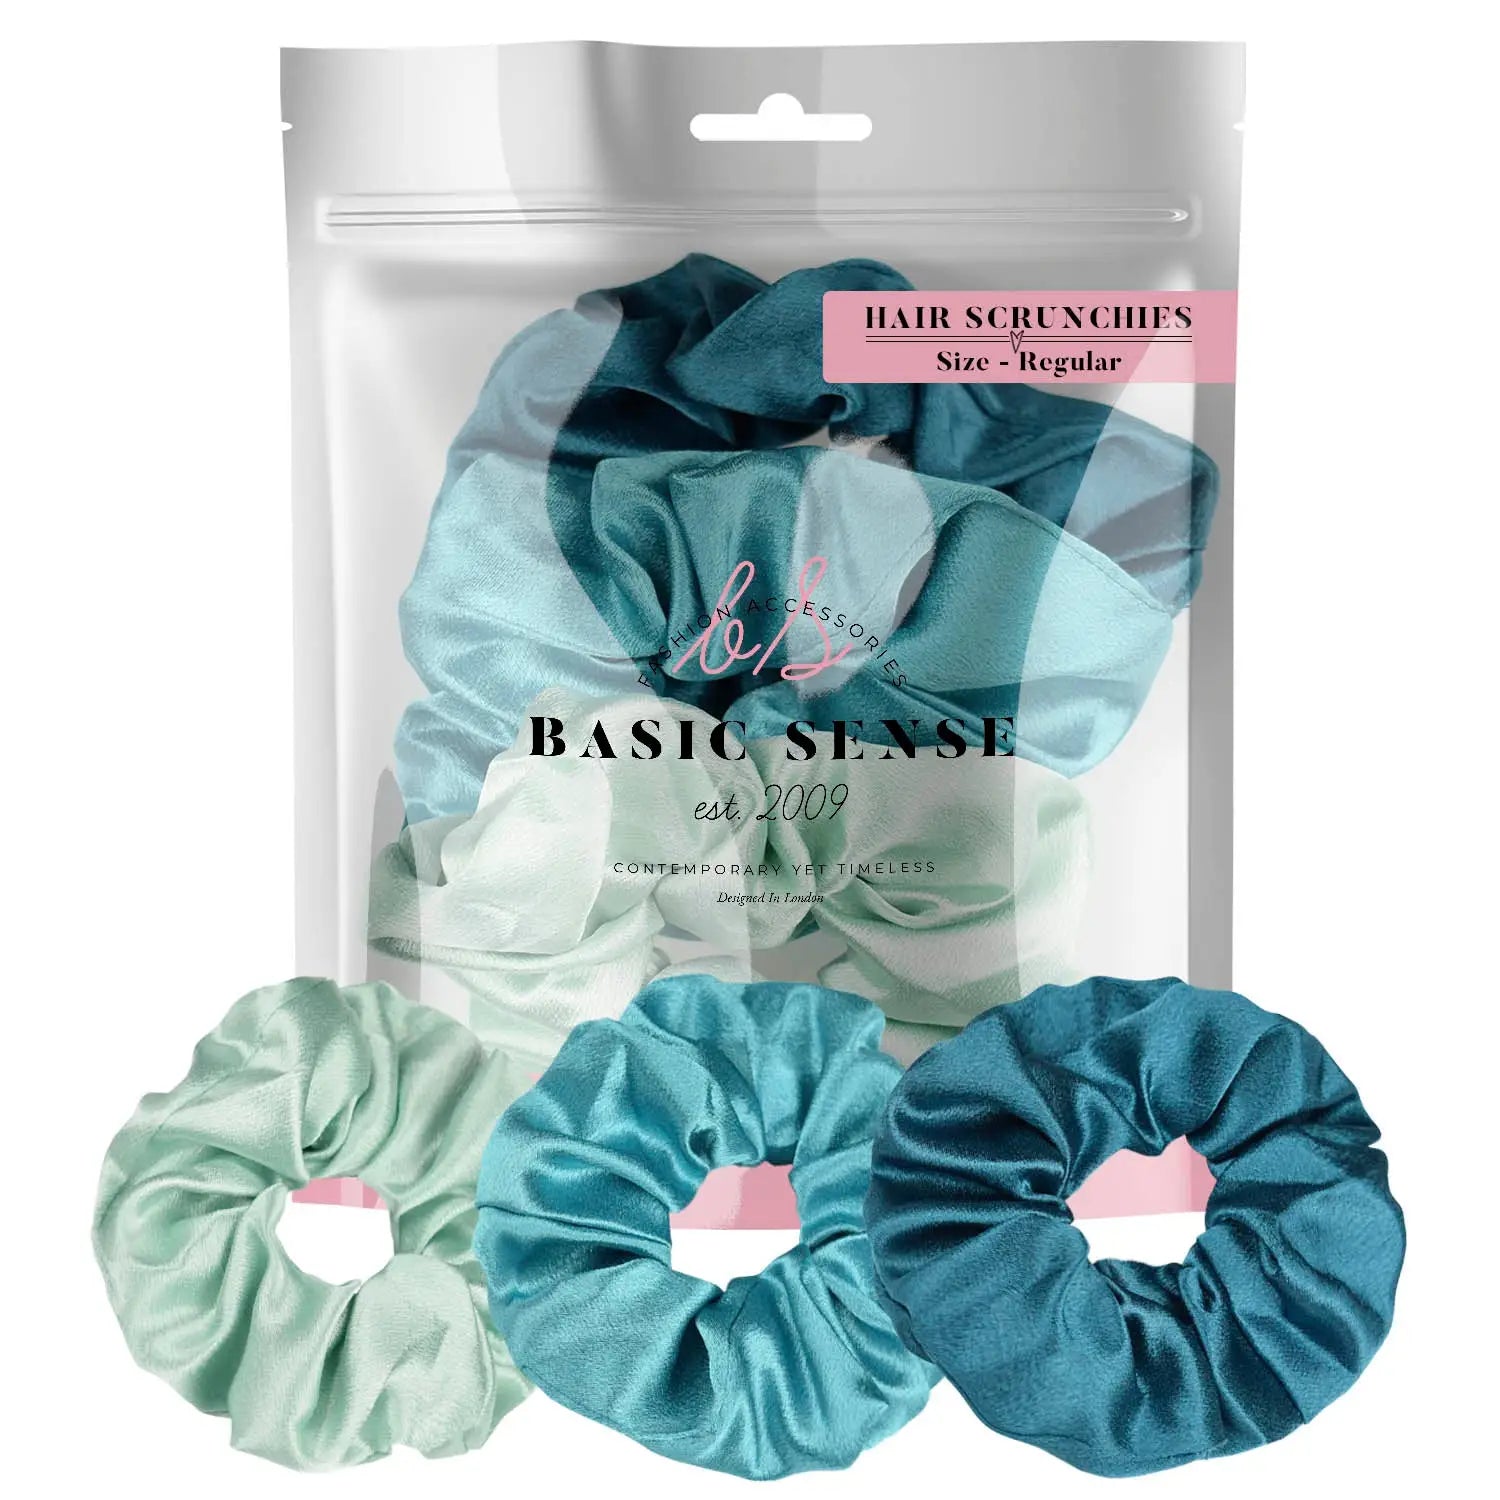 Luxurious multipack of 3 shimmering soft satin hair scrunchies